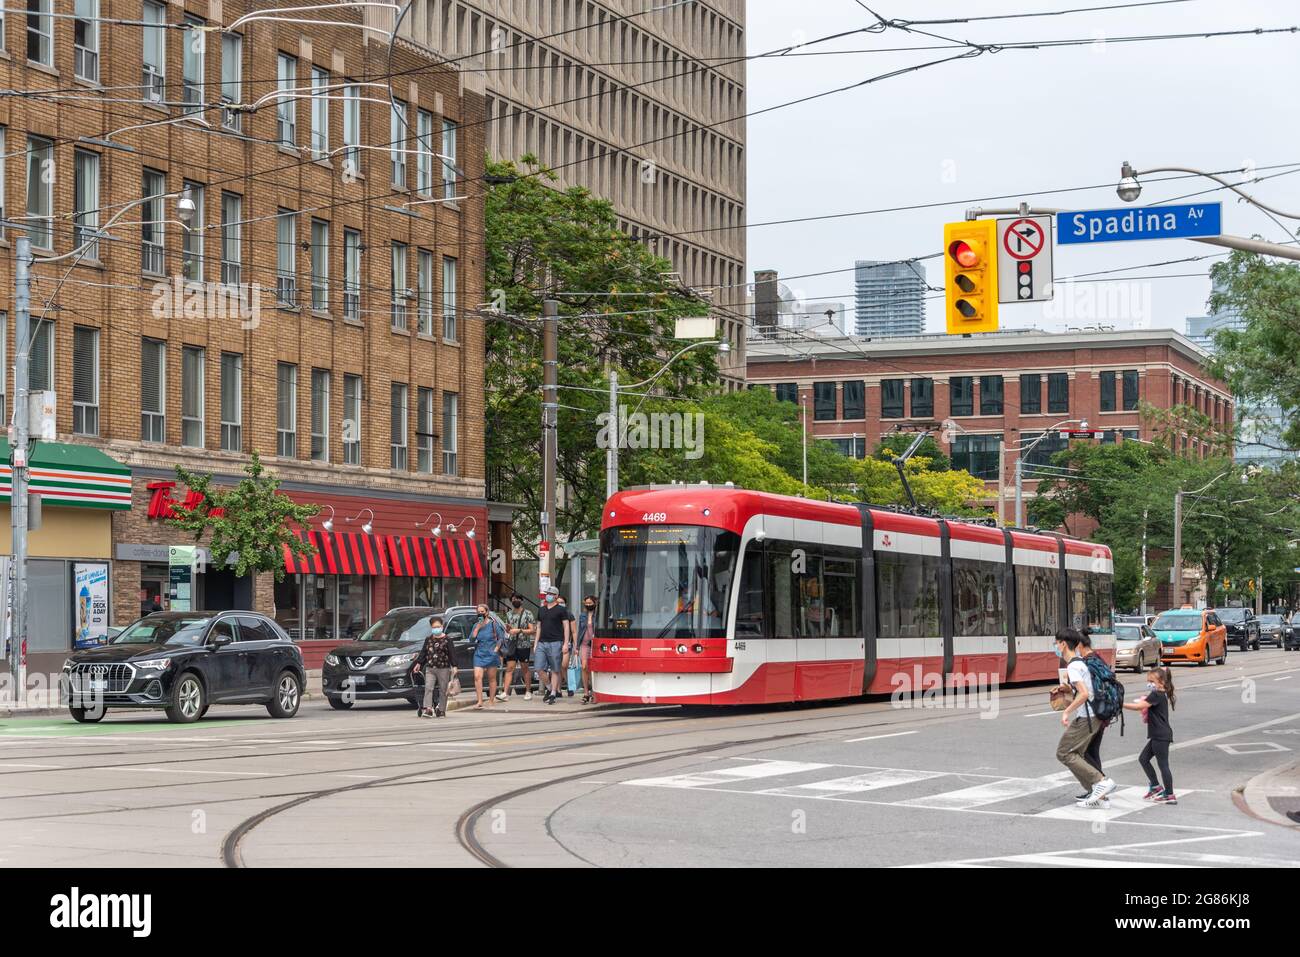 Bombardier Flexity Outlook streetcar or tram in the city center, Toronto, Canada Stock Photo